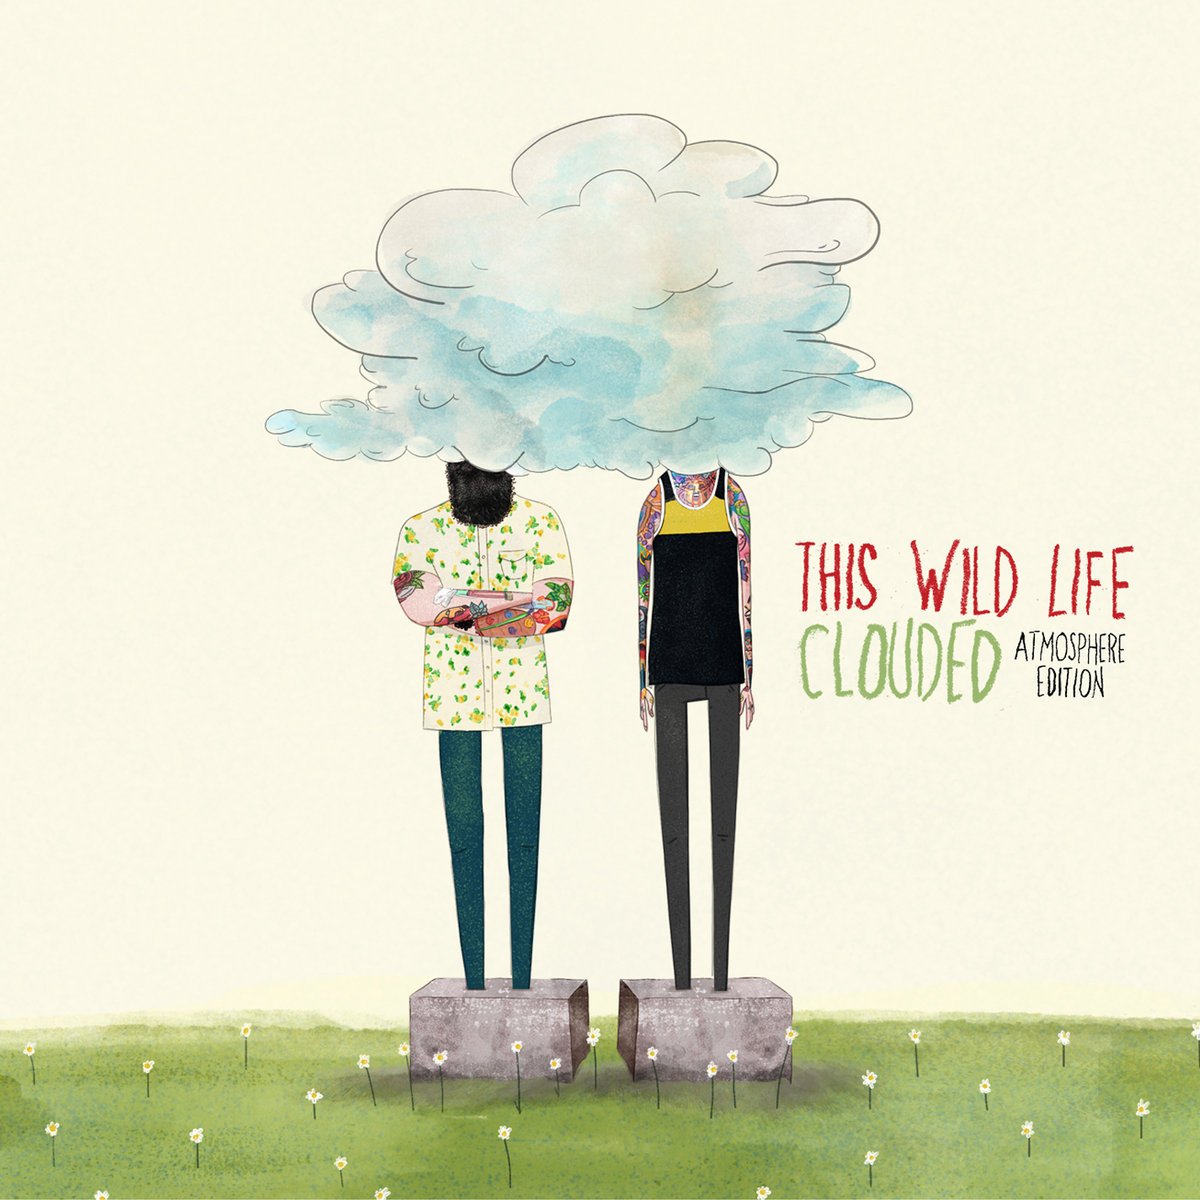 Staying my life. This Wild Life. This Wild Life clouded. Sleepwalking обложка альбома. Album Art saved my Life.